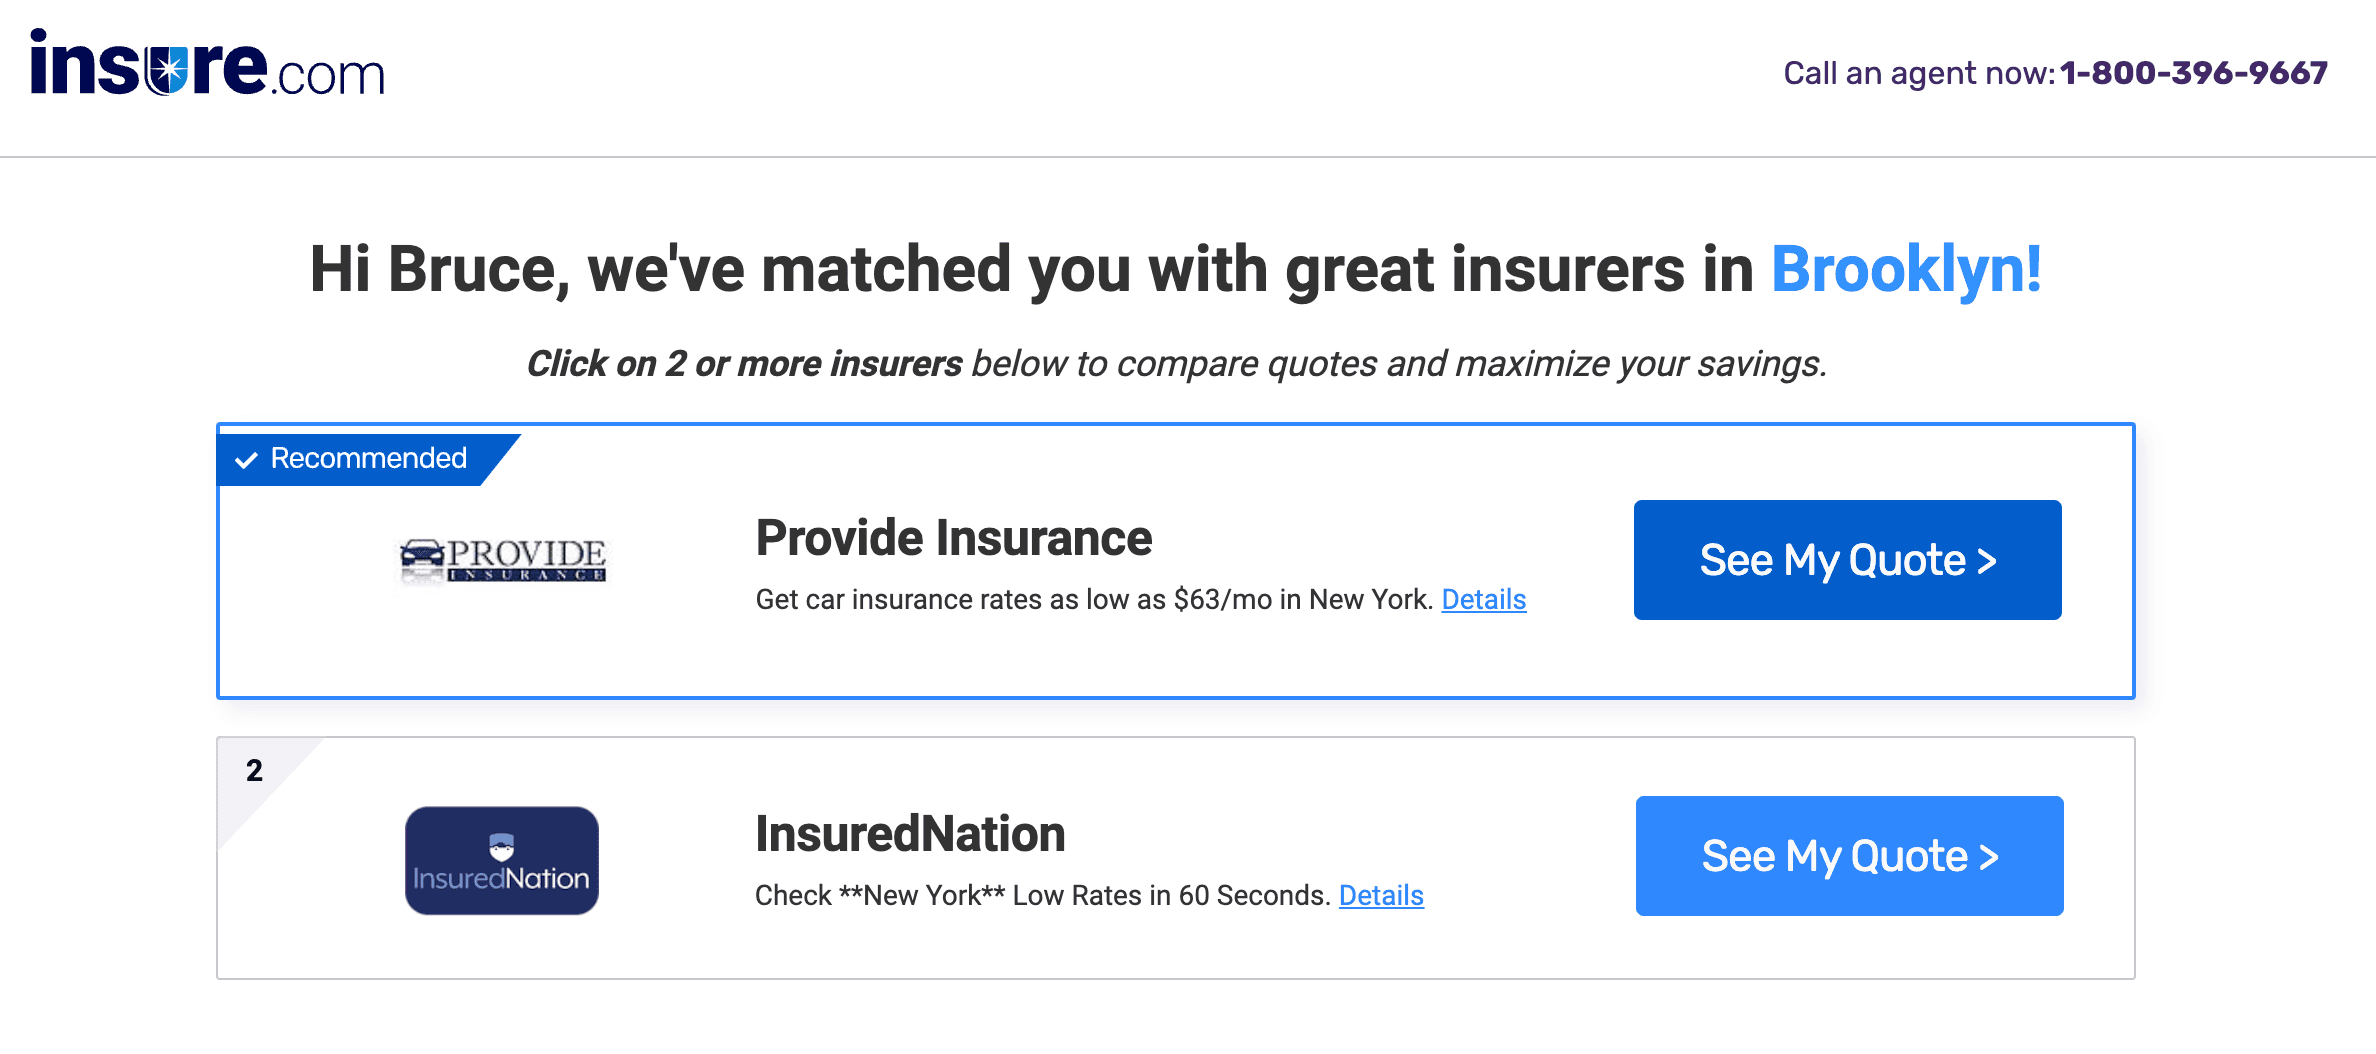 Otto insurance article screenshot of quotes on insure.com from provide insurance and insurednation with no quotes